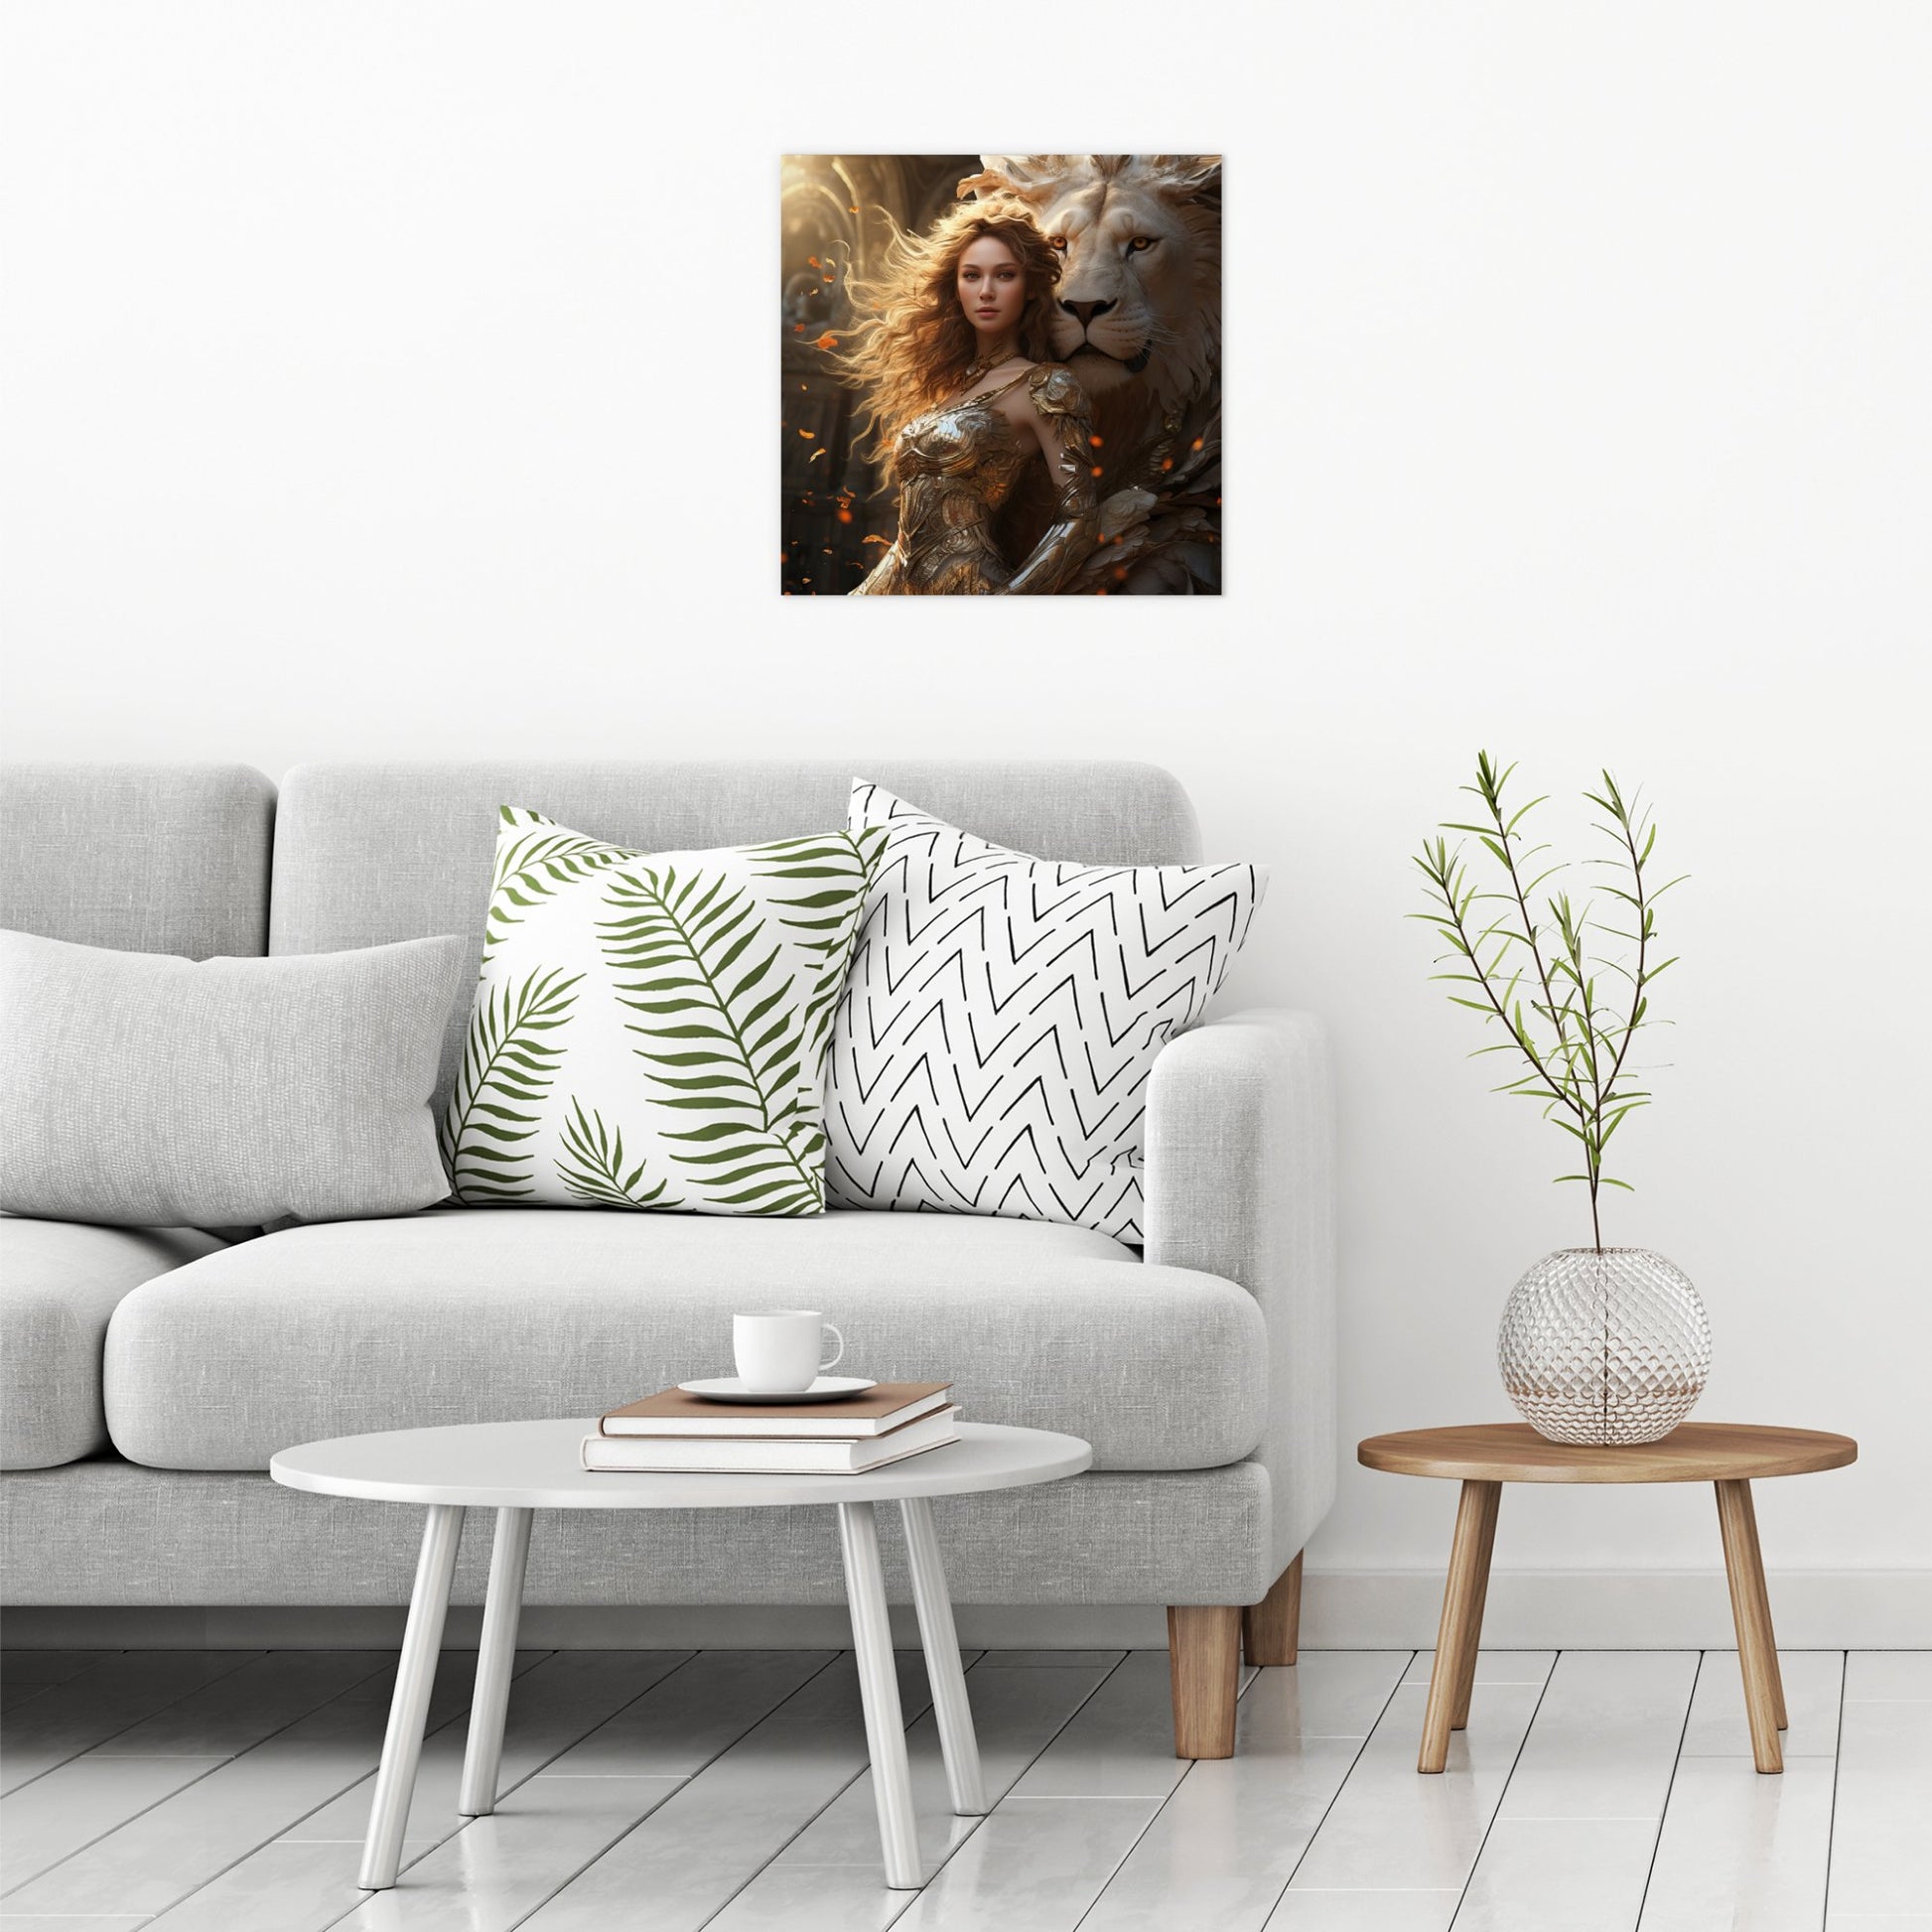 A contemporary modern room view showing a large size metal art poster display plate with printed design of a Girl with a White Lion